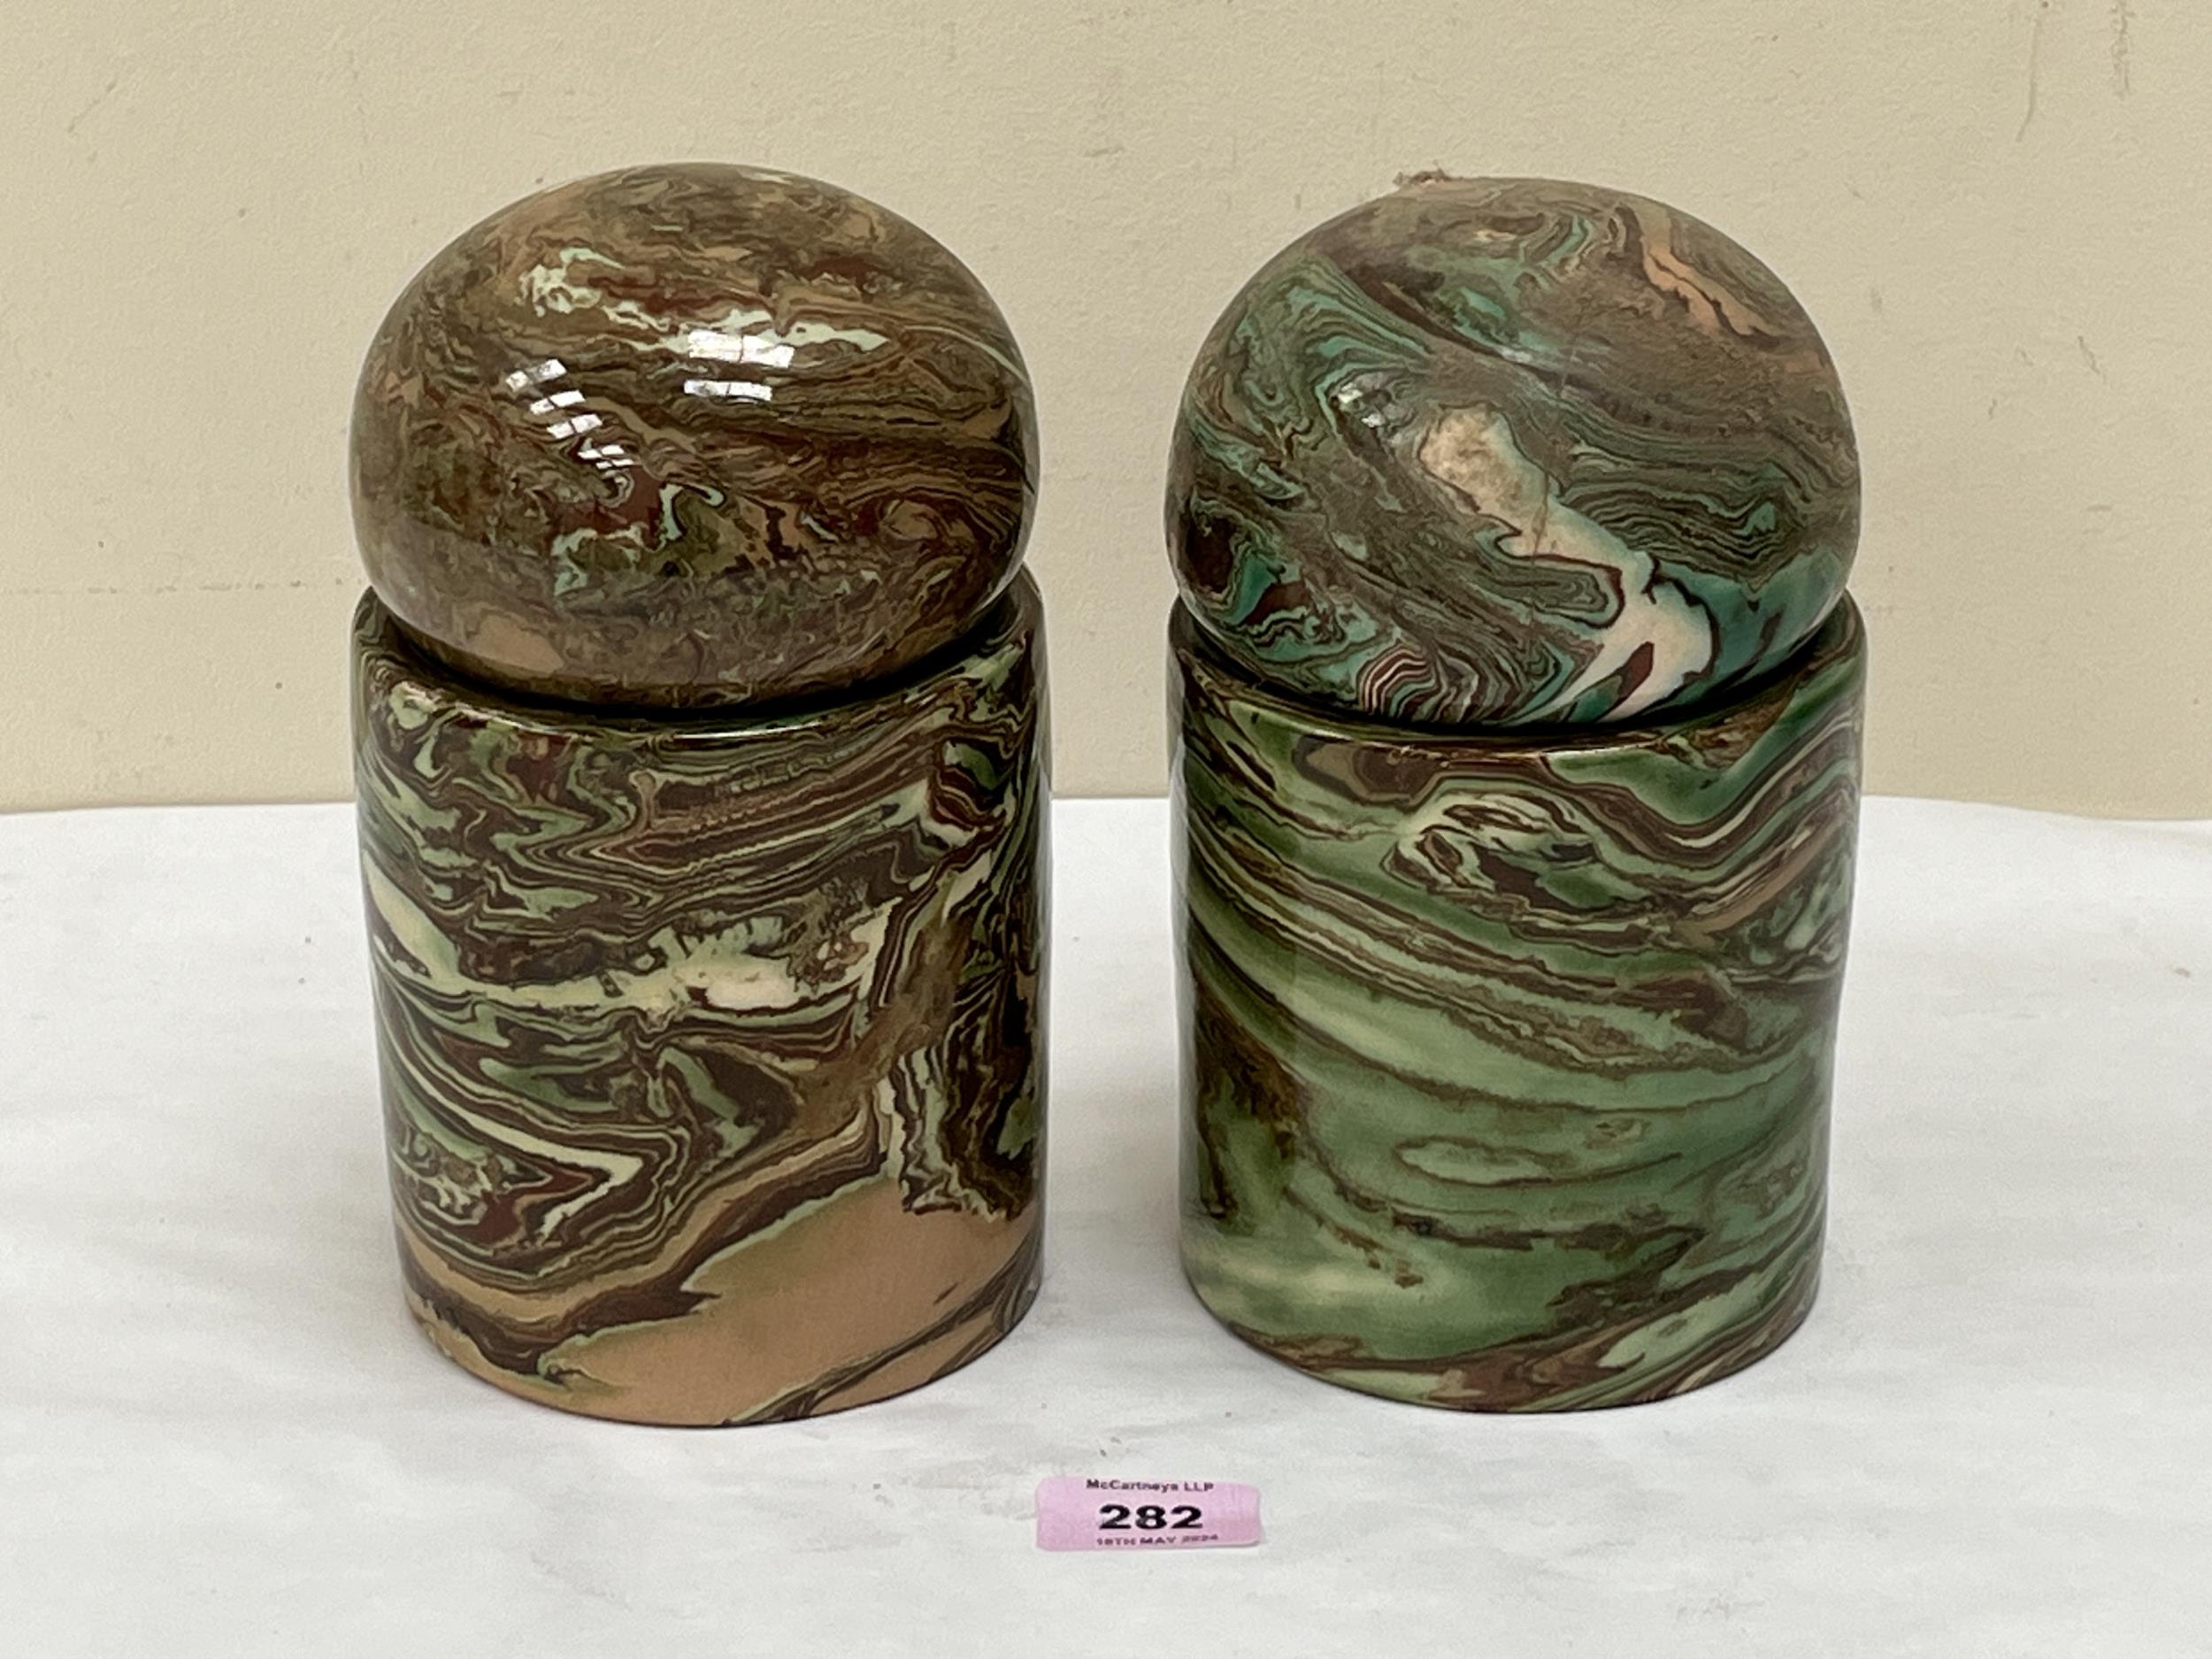 A pair of jars with globular covers, decorated with a marbled glaze in shades of green and brown.